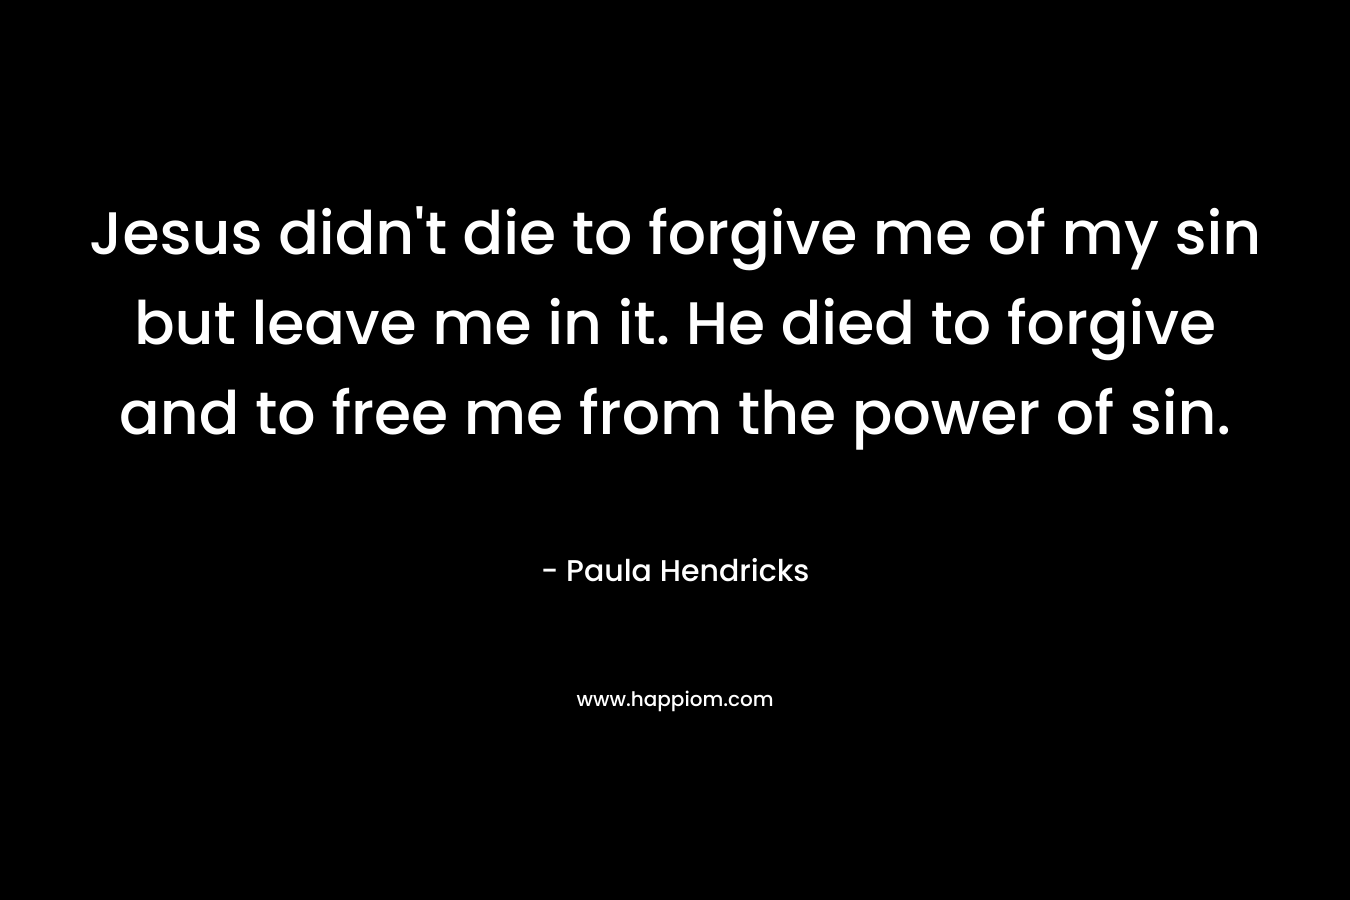 Jesus didn't die to forgive me of my sin but leave me in it. He died to forgive and to free me from the power of sin.